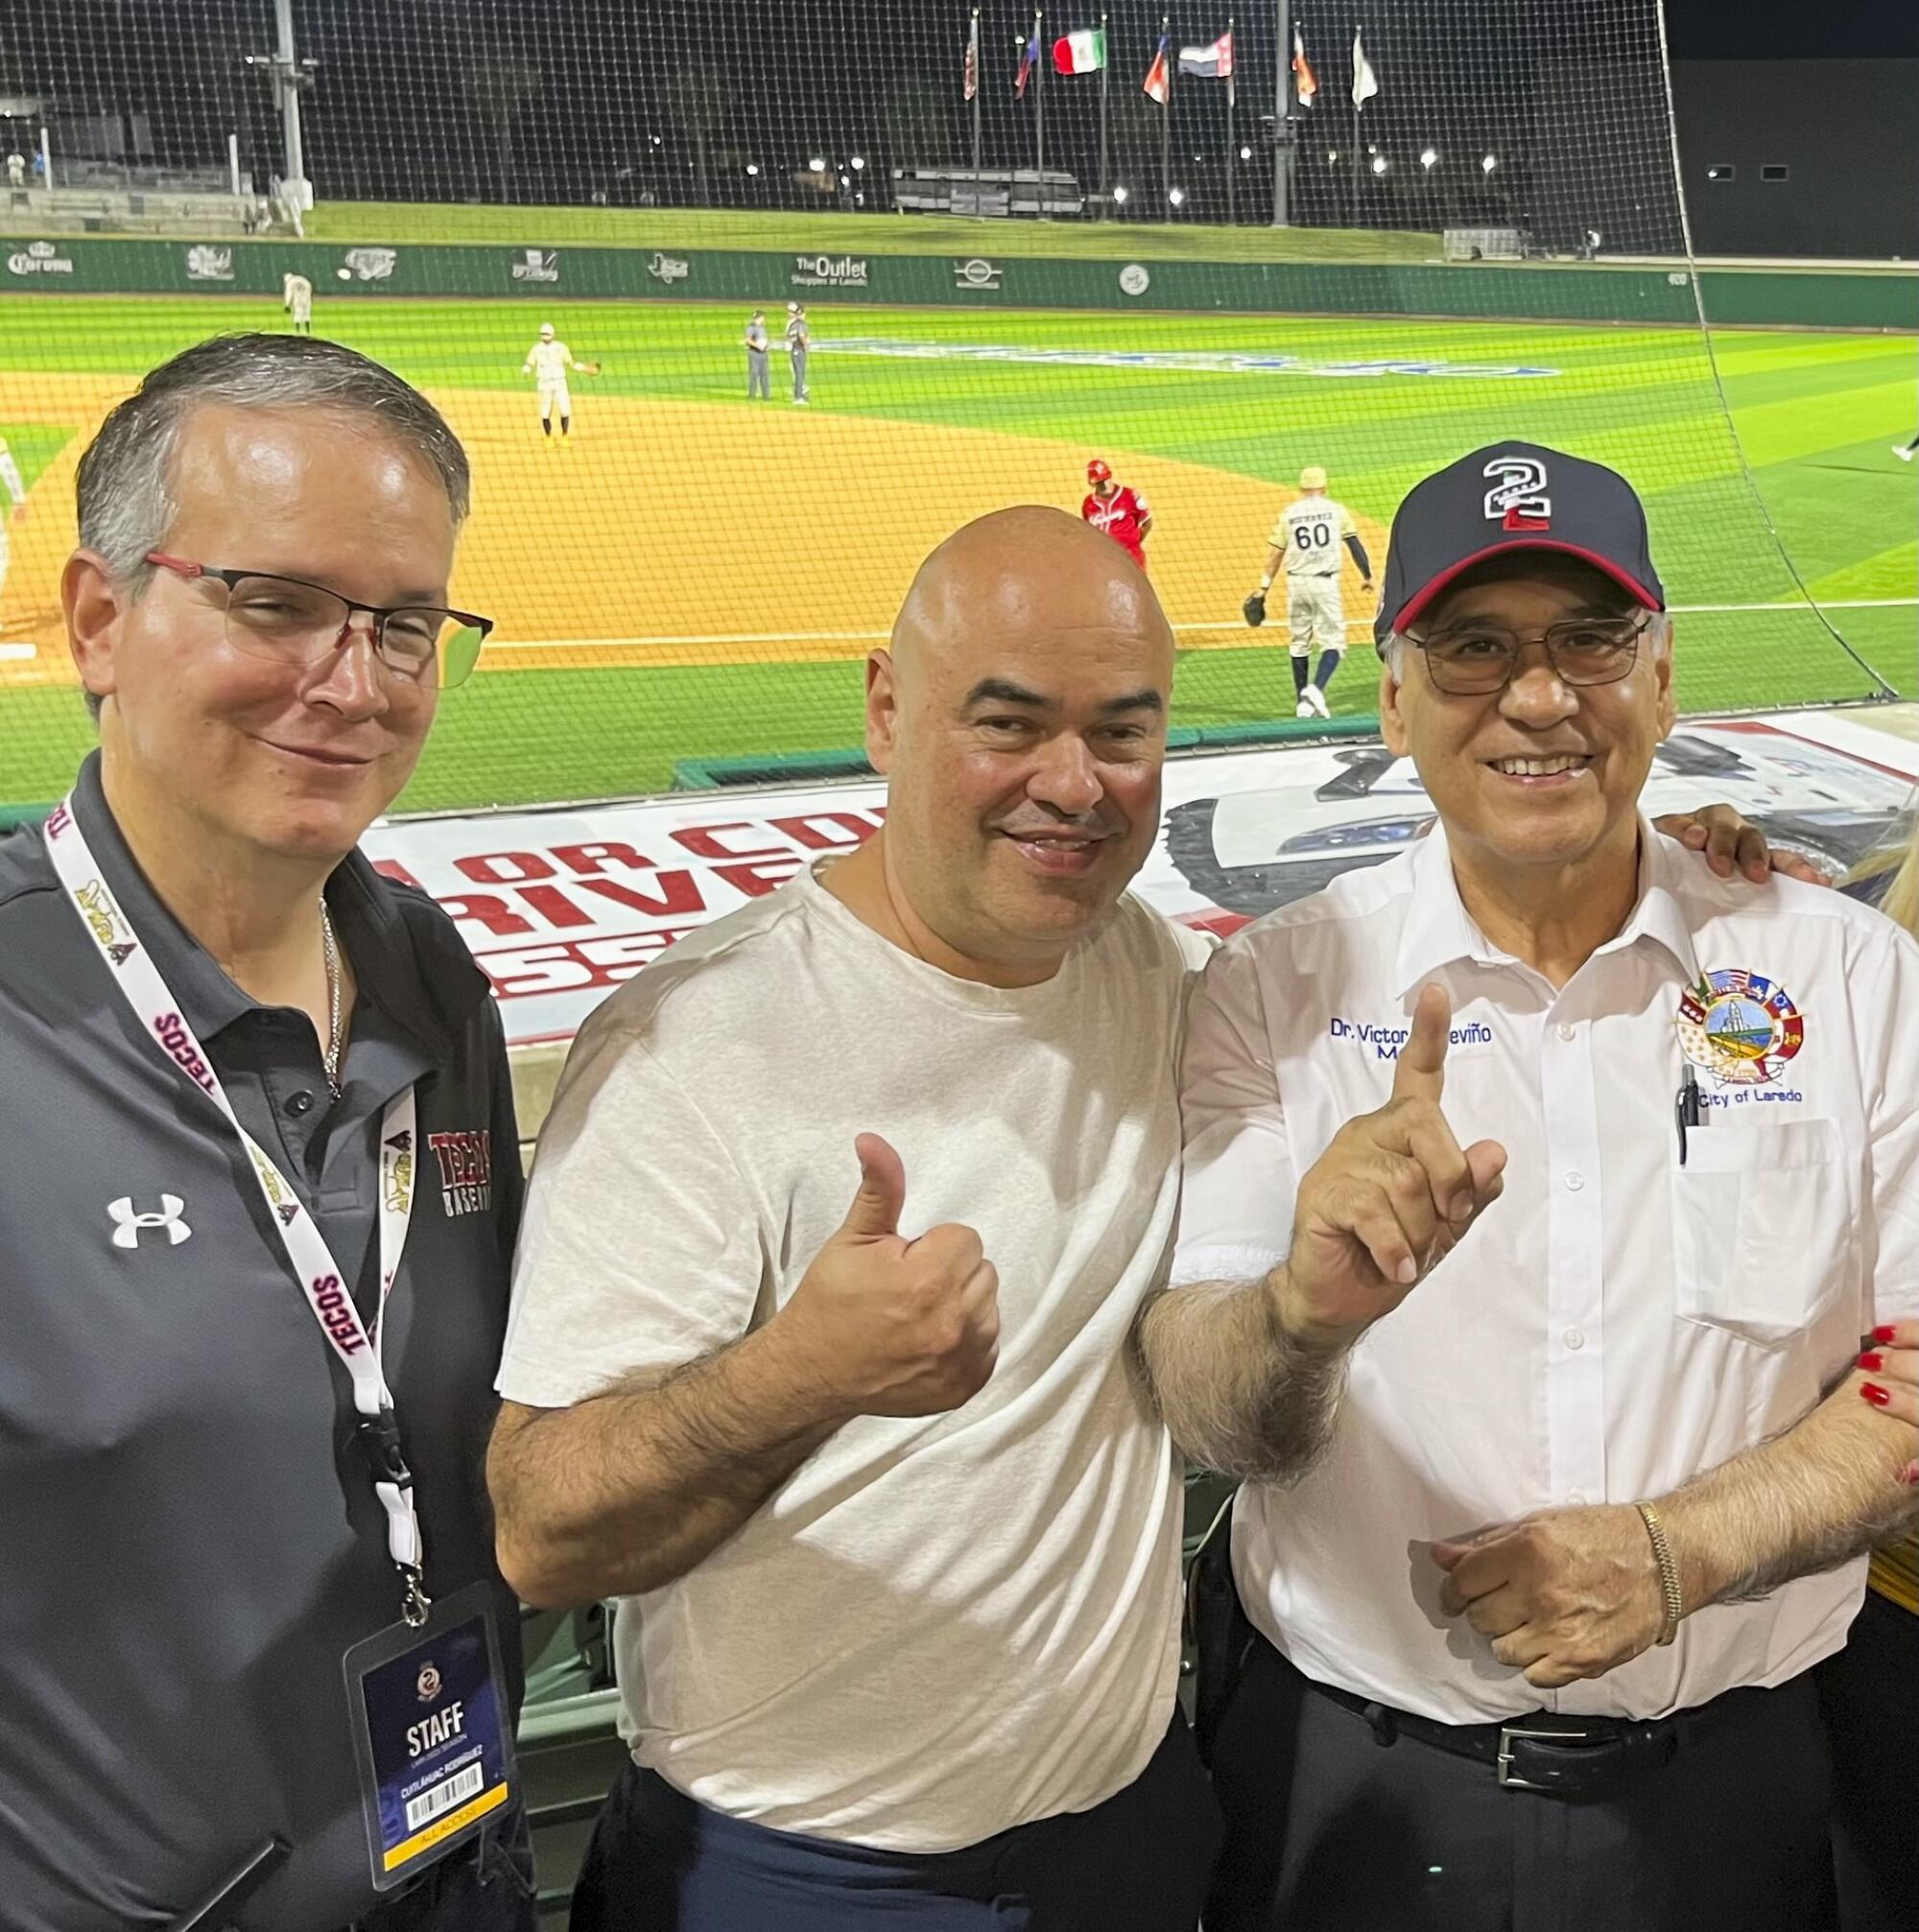 Tecos manager Cuitlahuac Rodriguez, team president Chara Mansur and Laredo Mayor Victor Treviño pose for a photo.